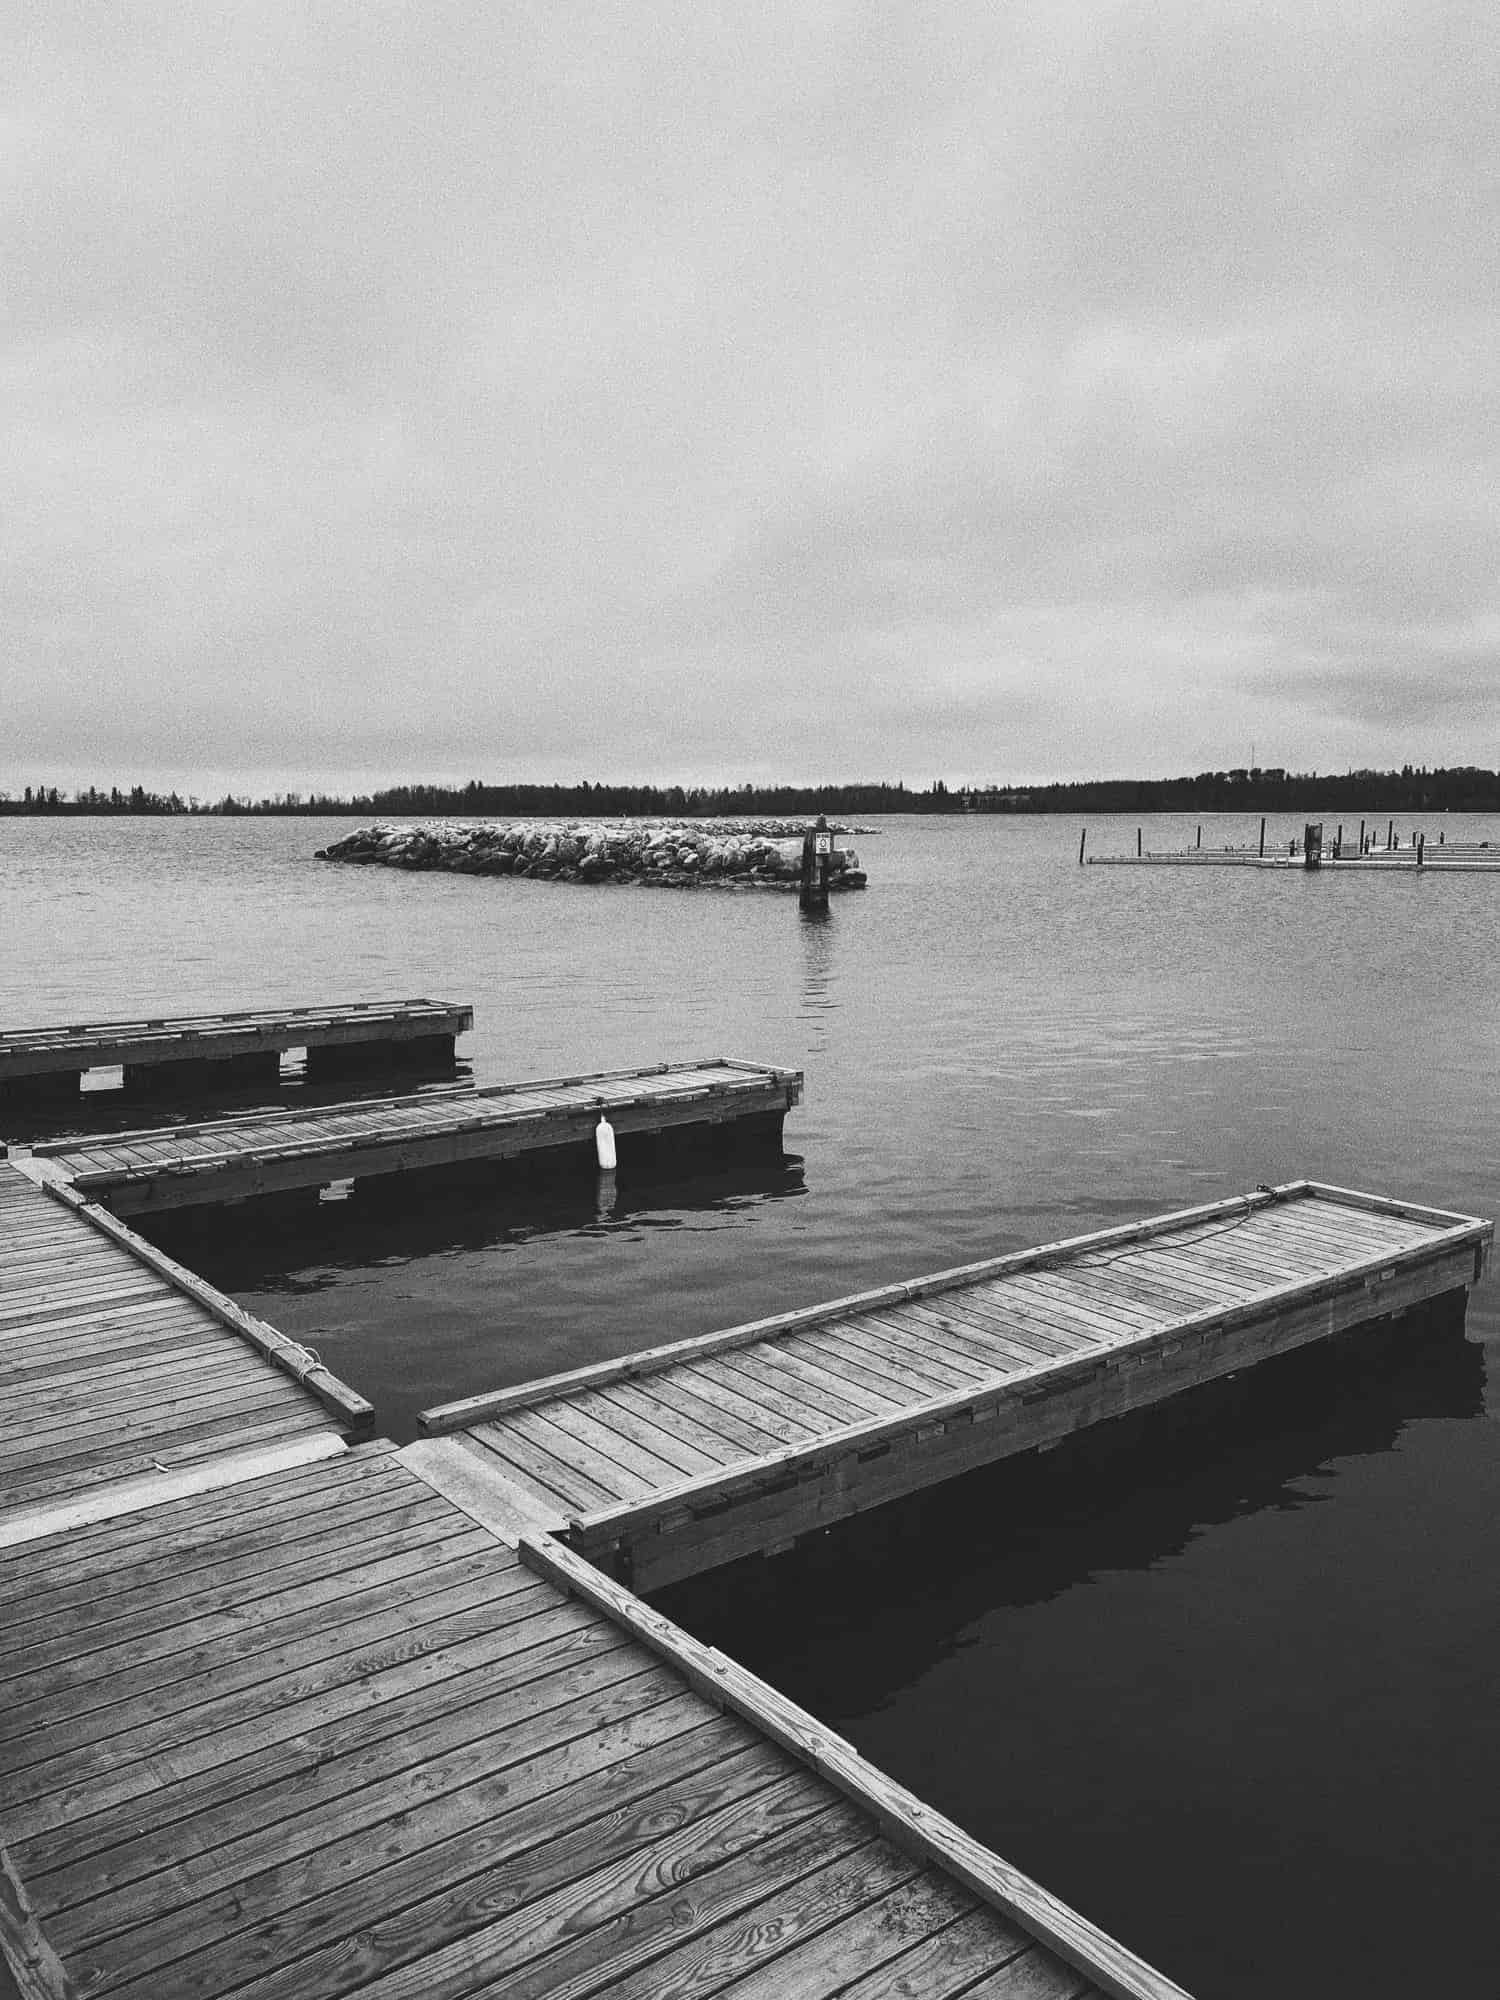 Black and white photograph of a vacant lakeside marina.